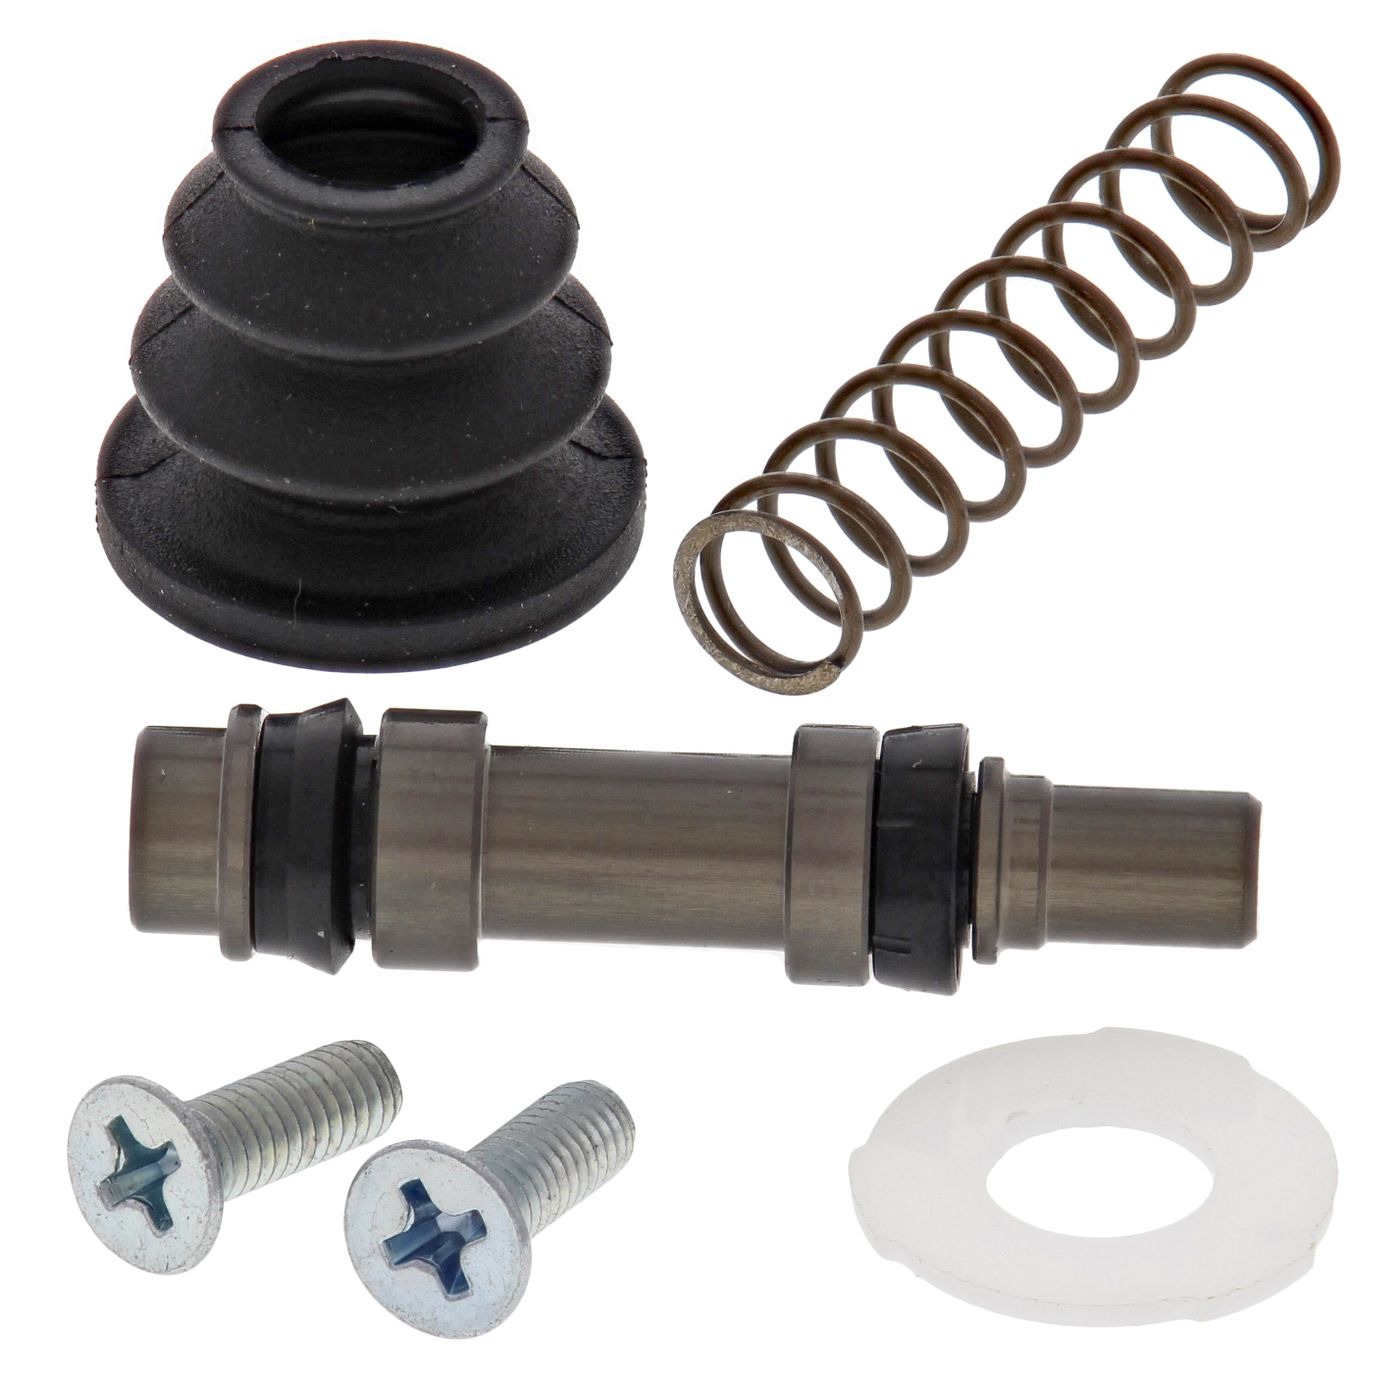 Wrp Clutch Master Cylinder Kit - WRP184003 image